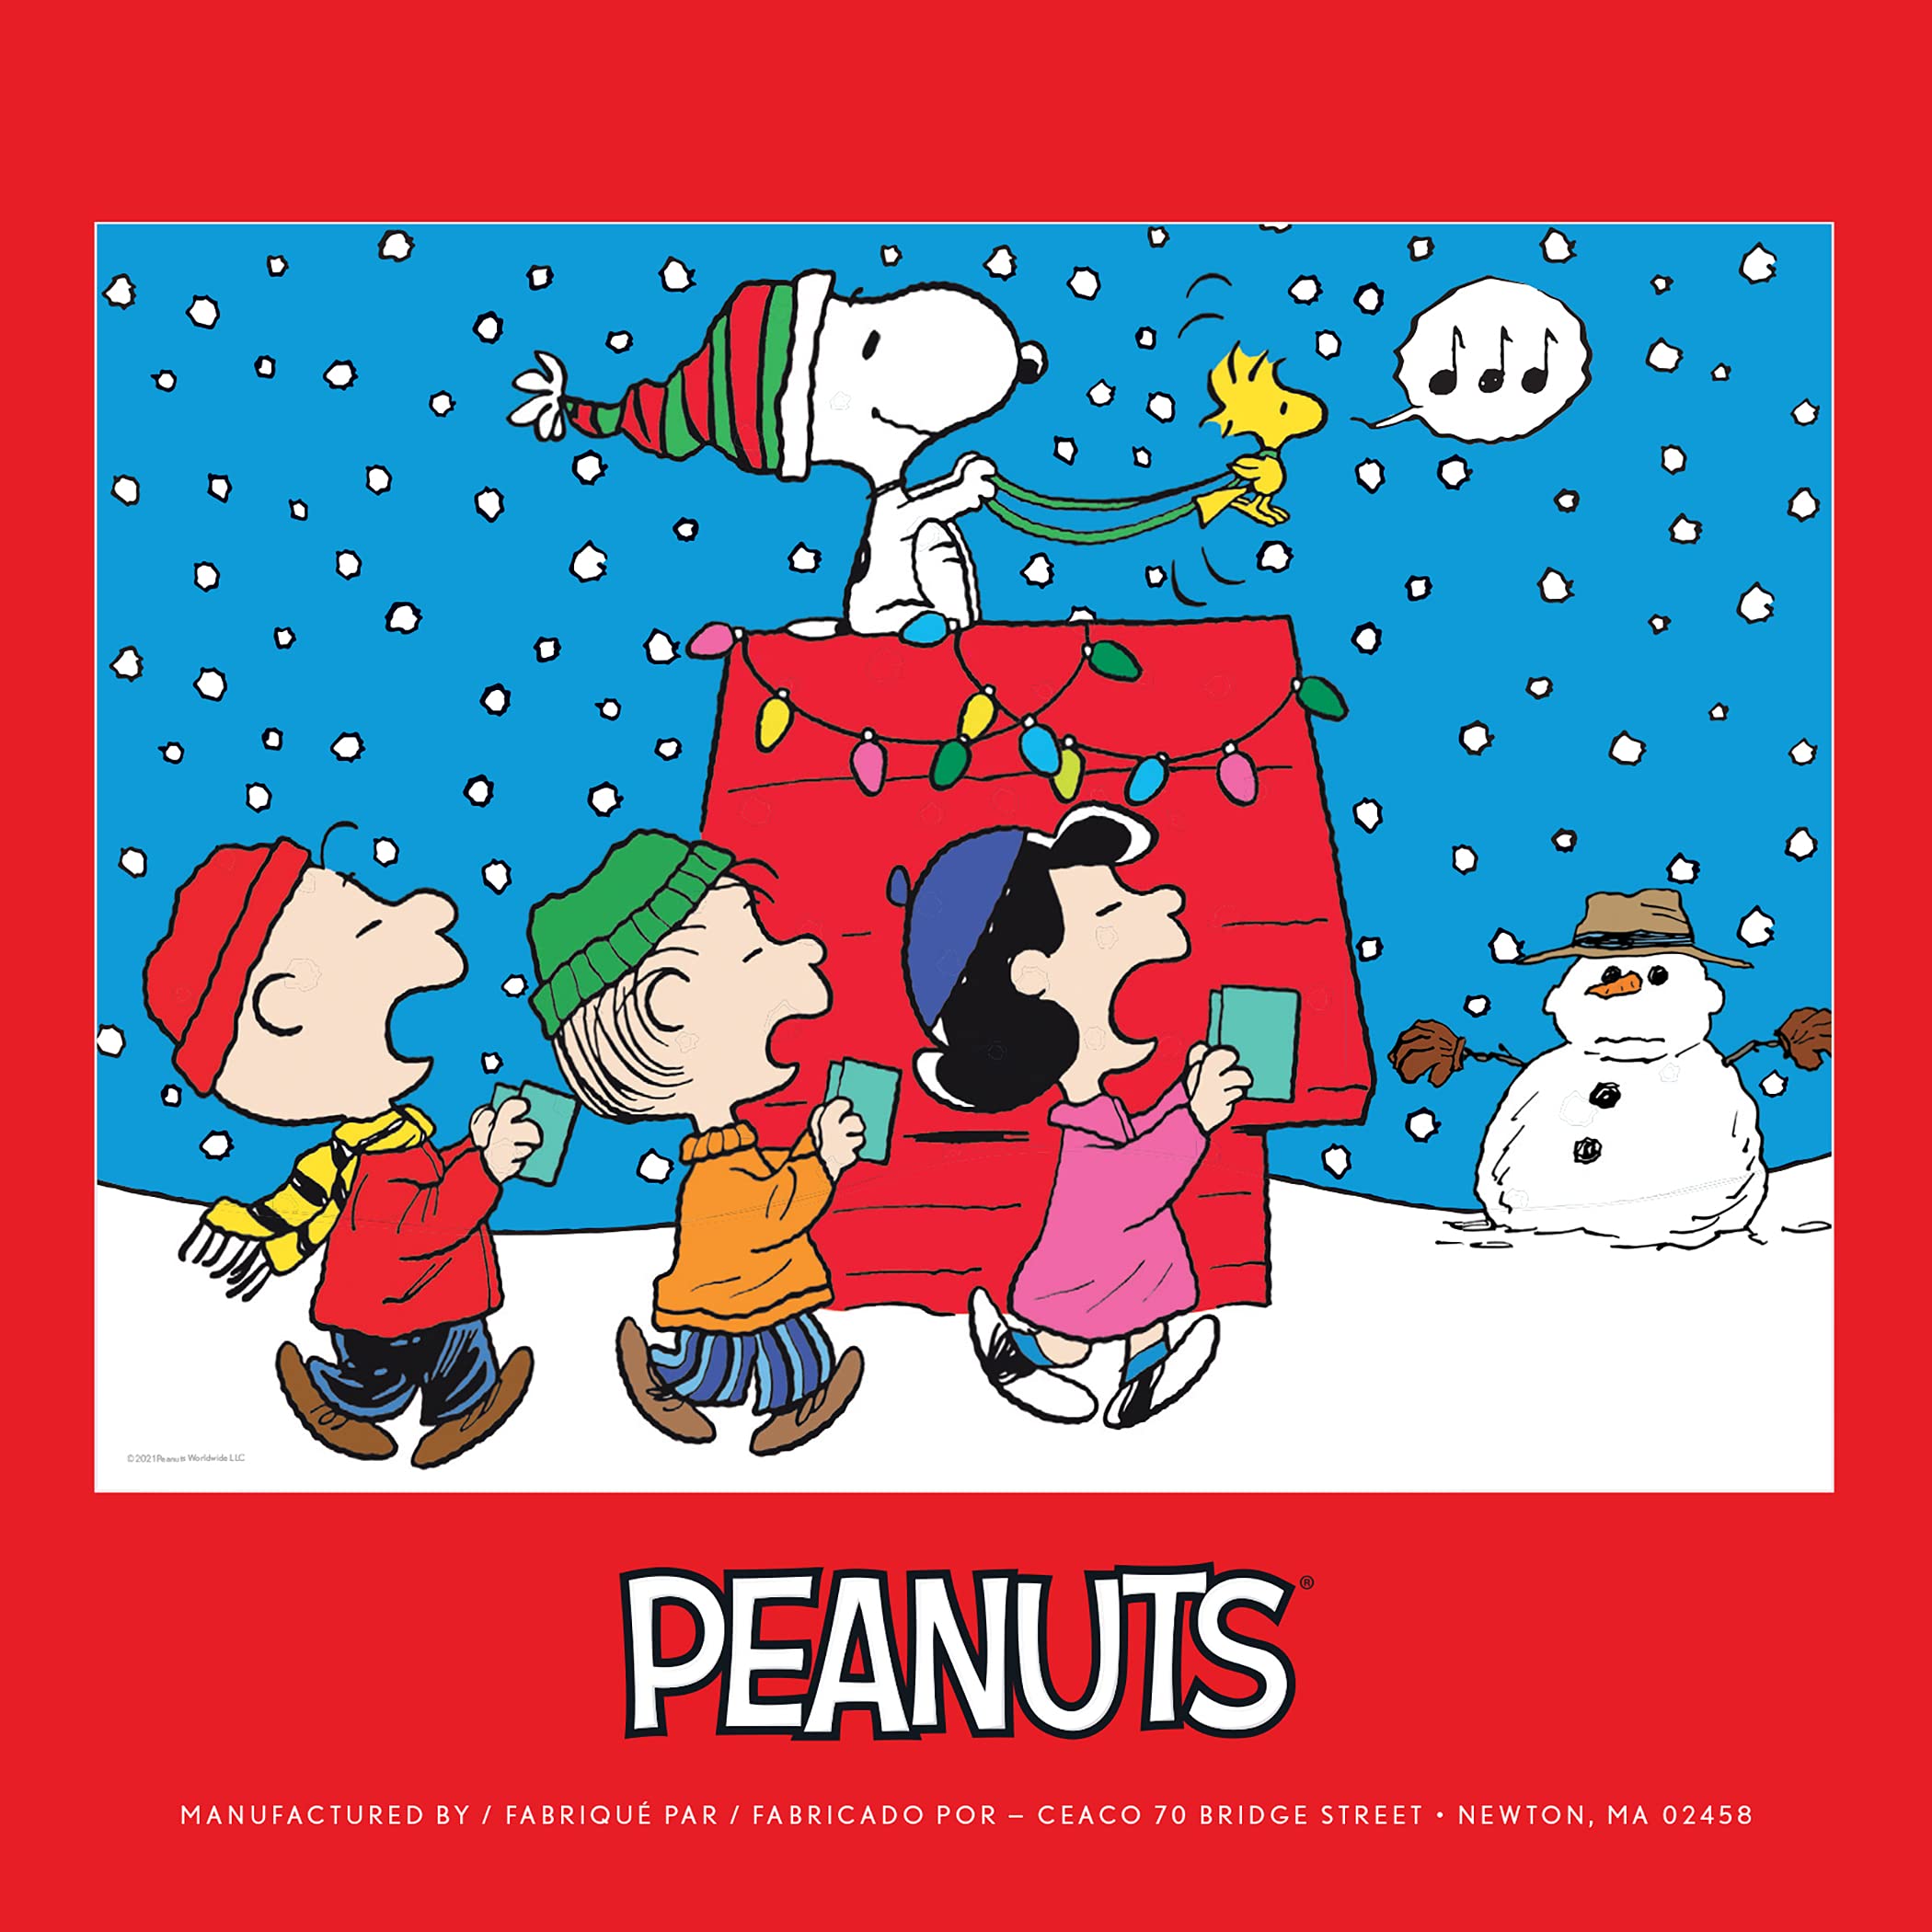 Ceaco - Peanuts - Holiday - Snoopy and The Singers - 100 Piece Jigsaw Puzzle